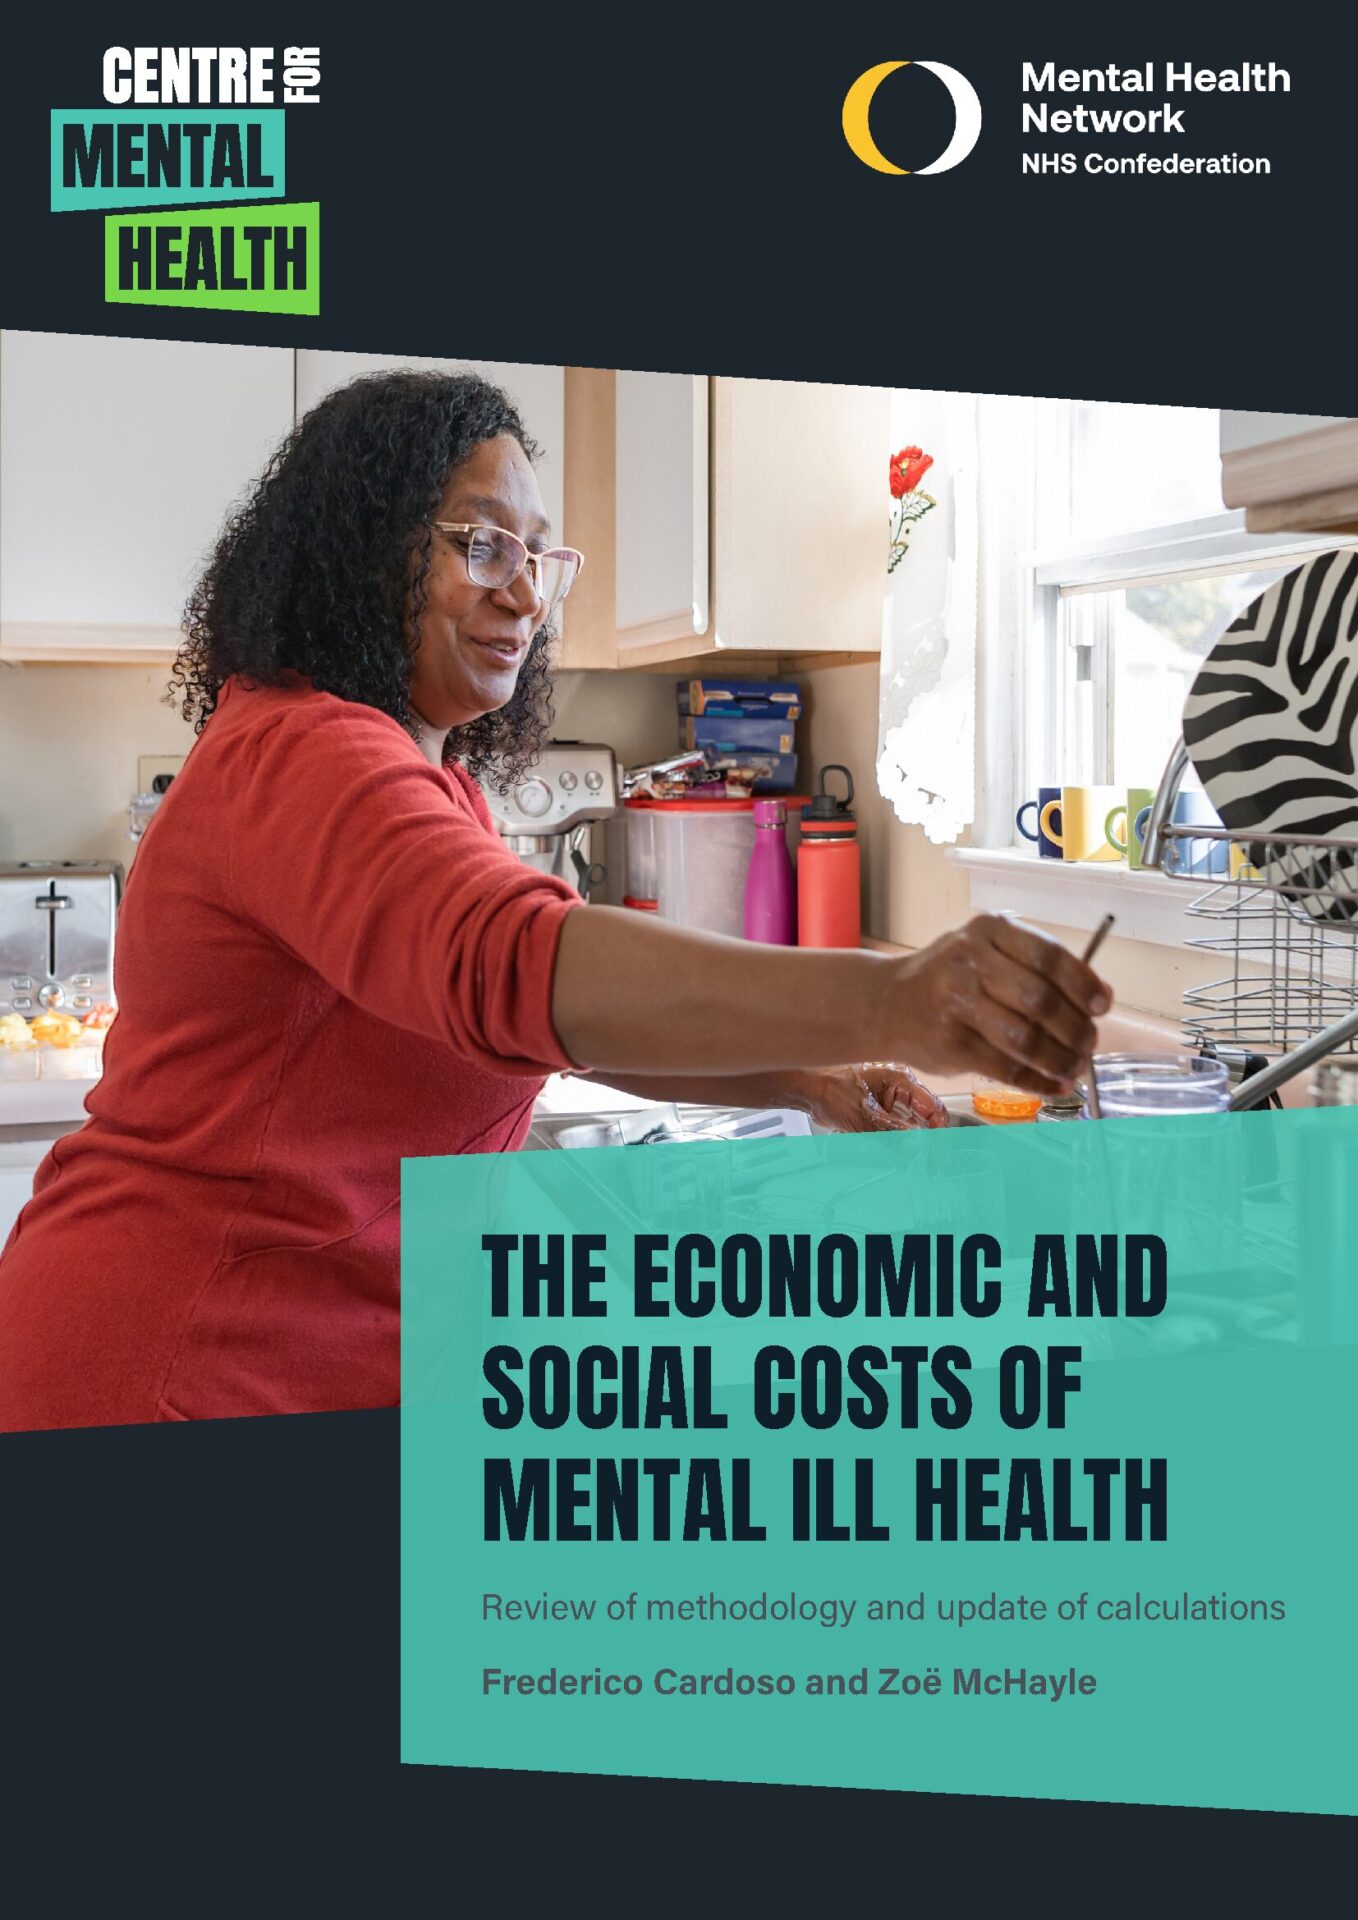 Photo: Black woman wearing red jumper doing the washing up at home. Text: The economic and social costs of mental ill health. Centre for Mental Health and NHS Confederation Mental Health Network. Frederico Cardoso and Zoë McHayle